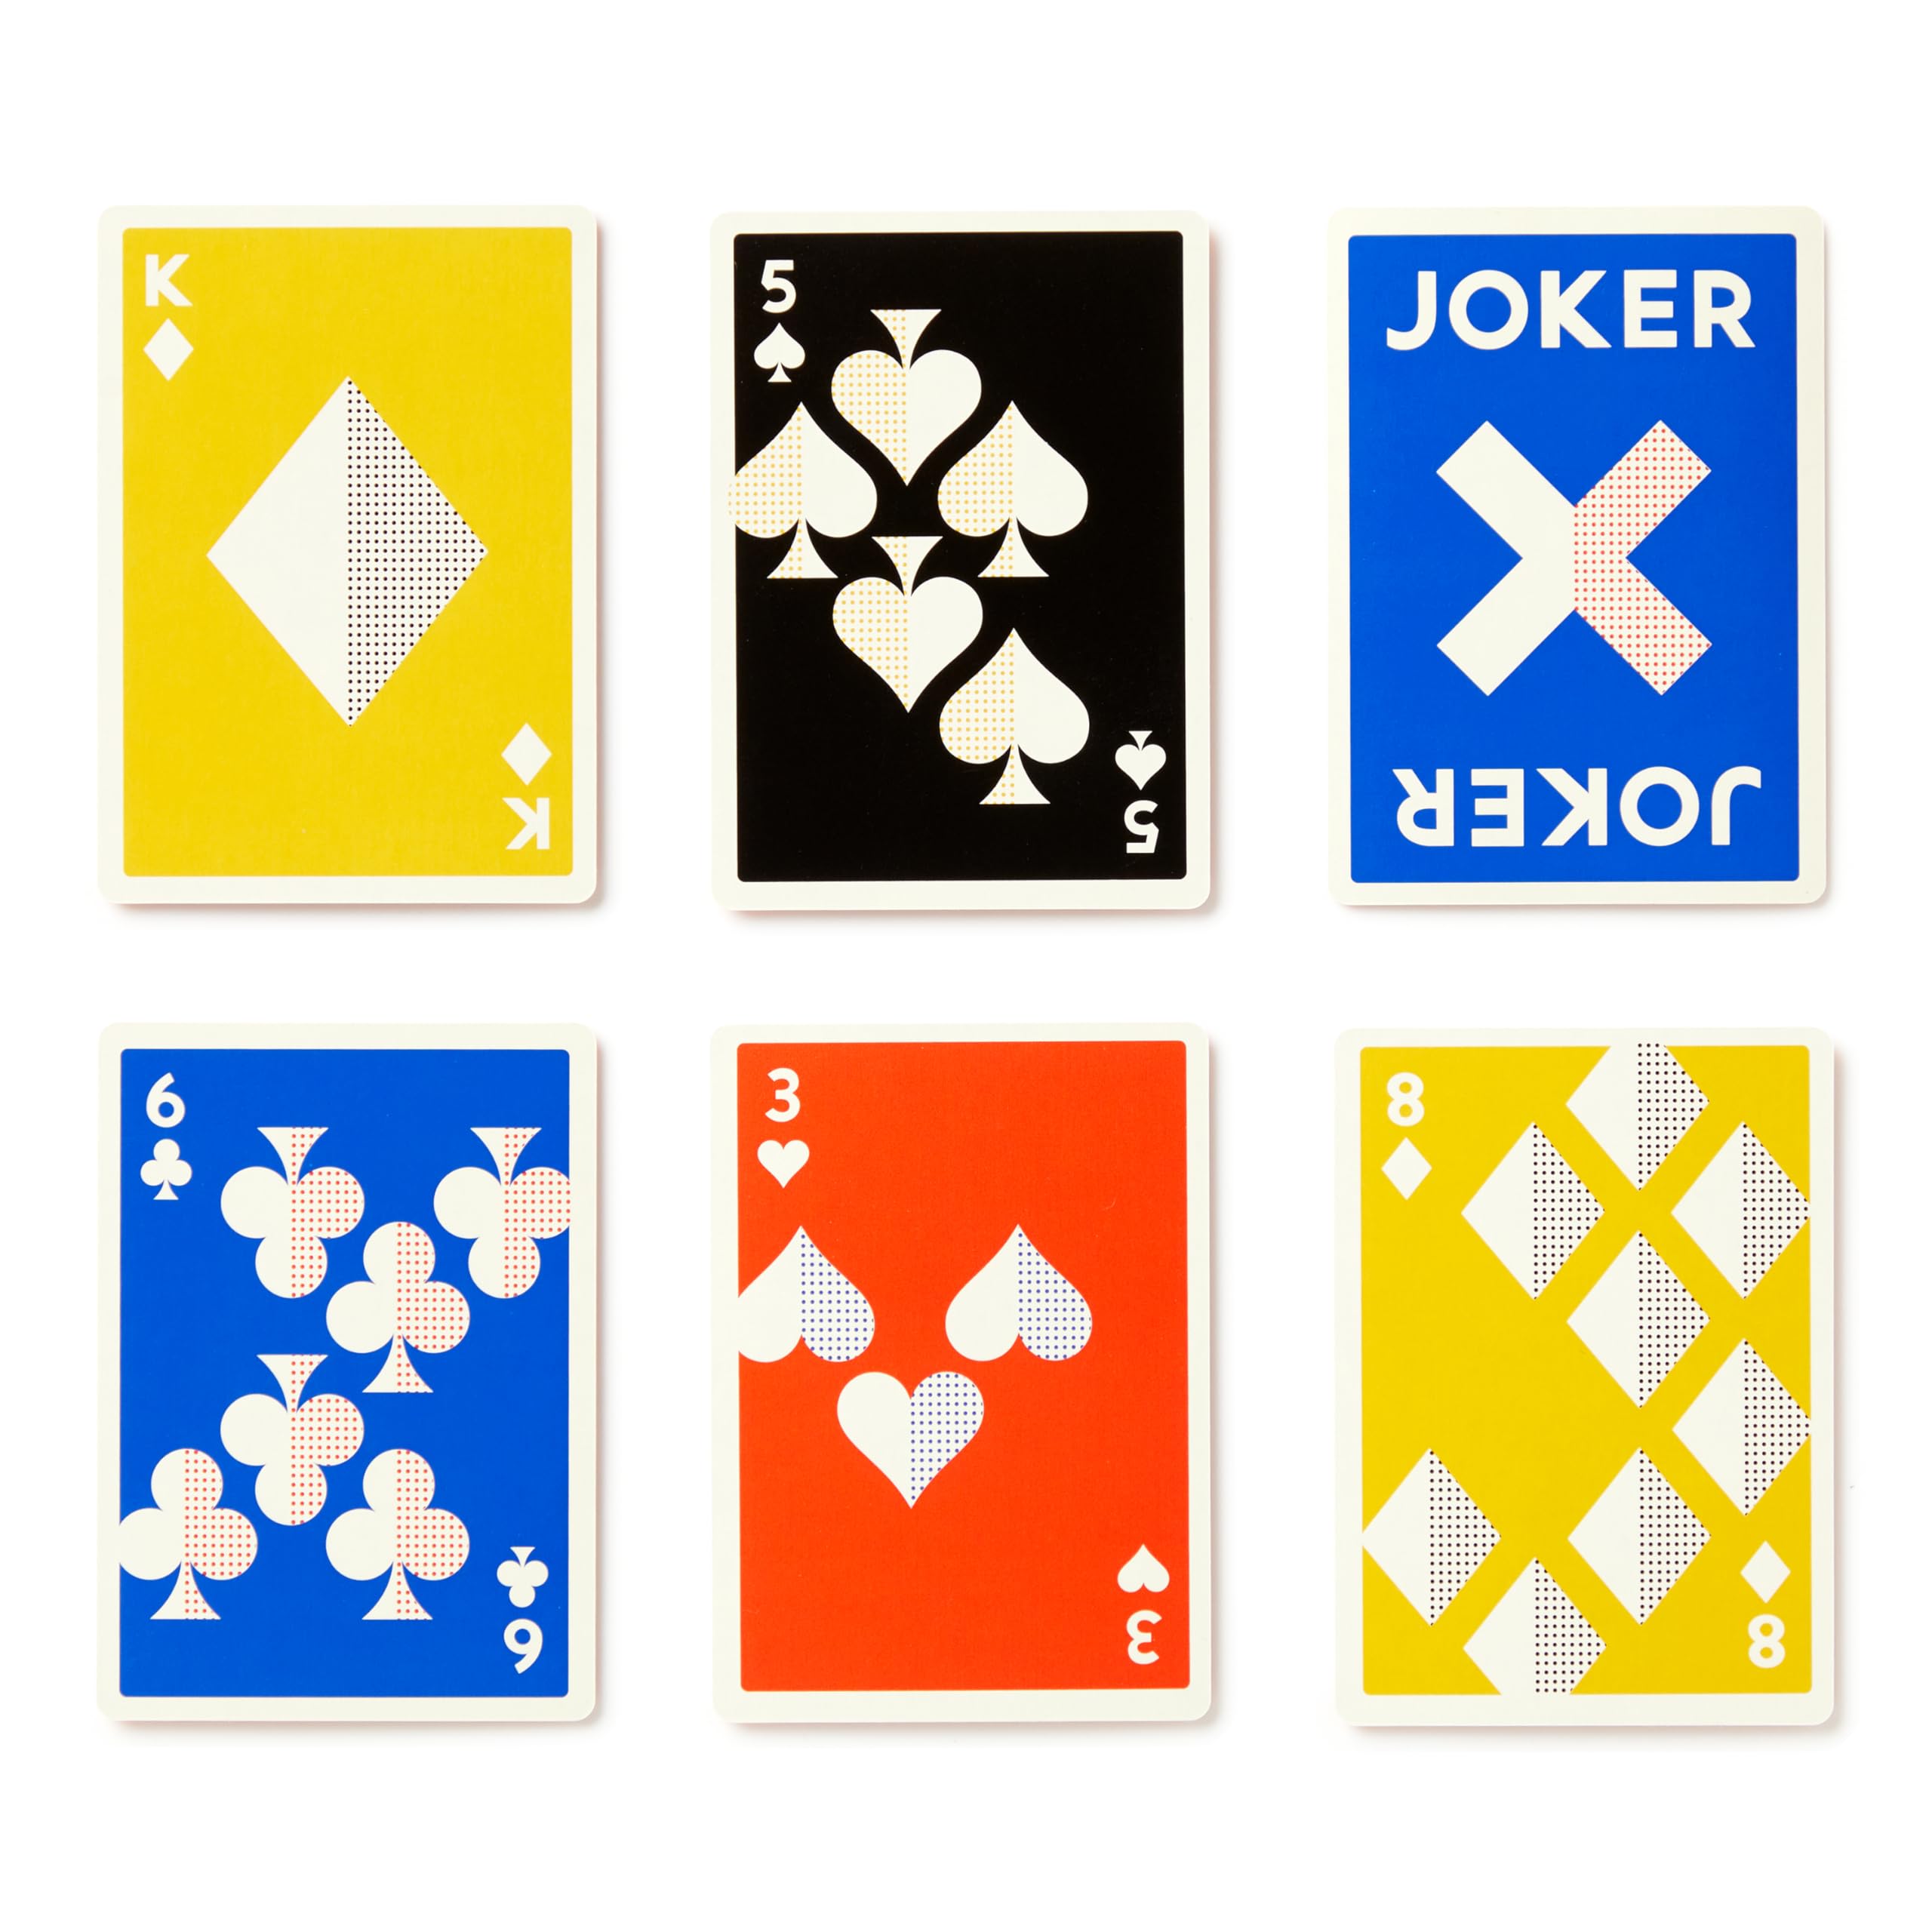 Brass Monkey Read Em and Weep - Beautiful Vintage Inspired Playing Card Set